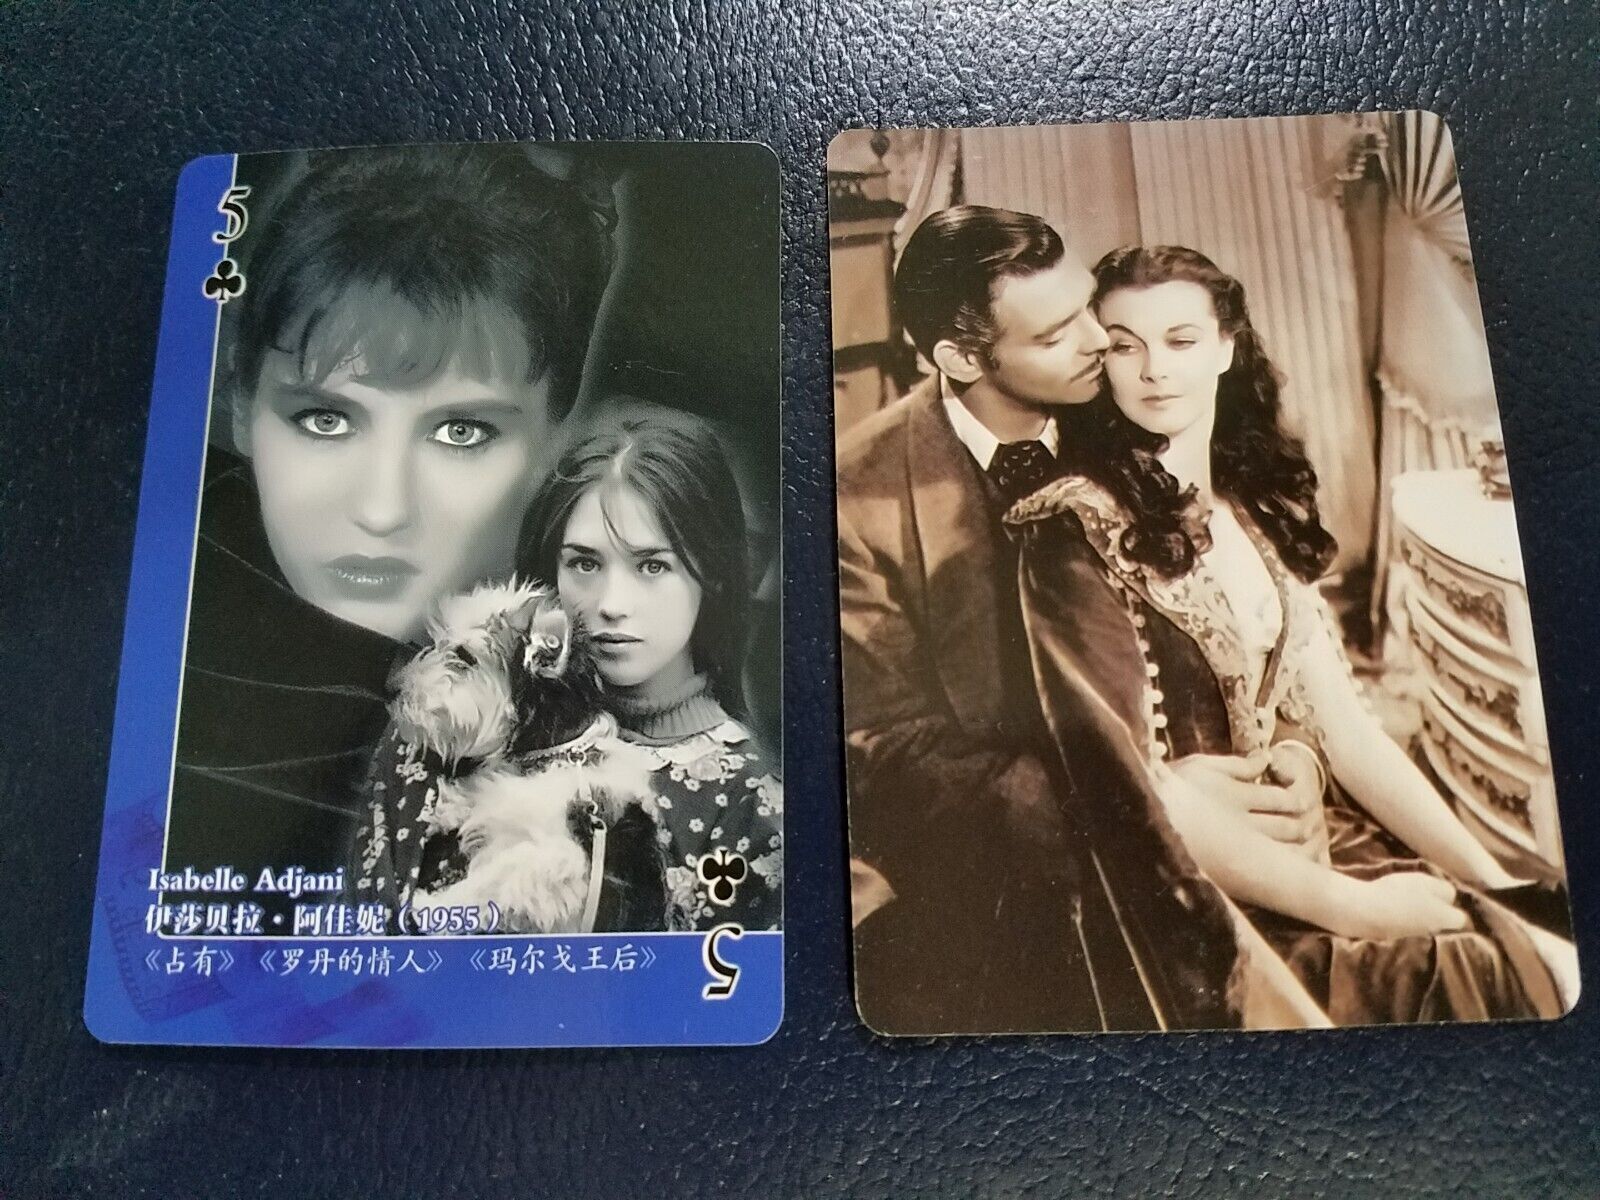 Isabelle Adjani Actress Possession Masquerade World Movie Star Playing Card